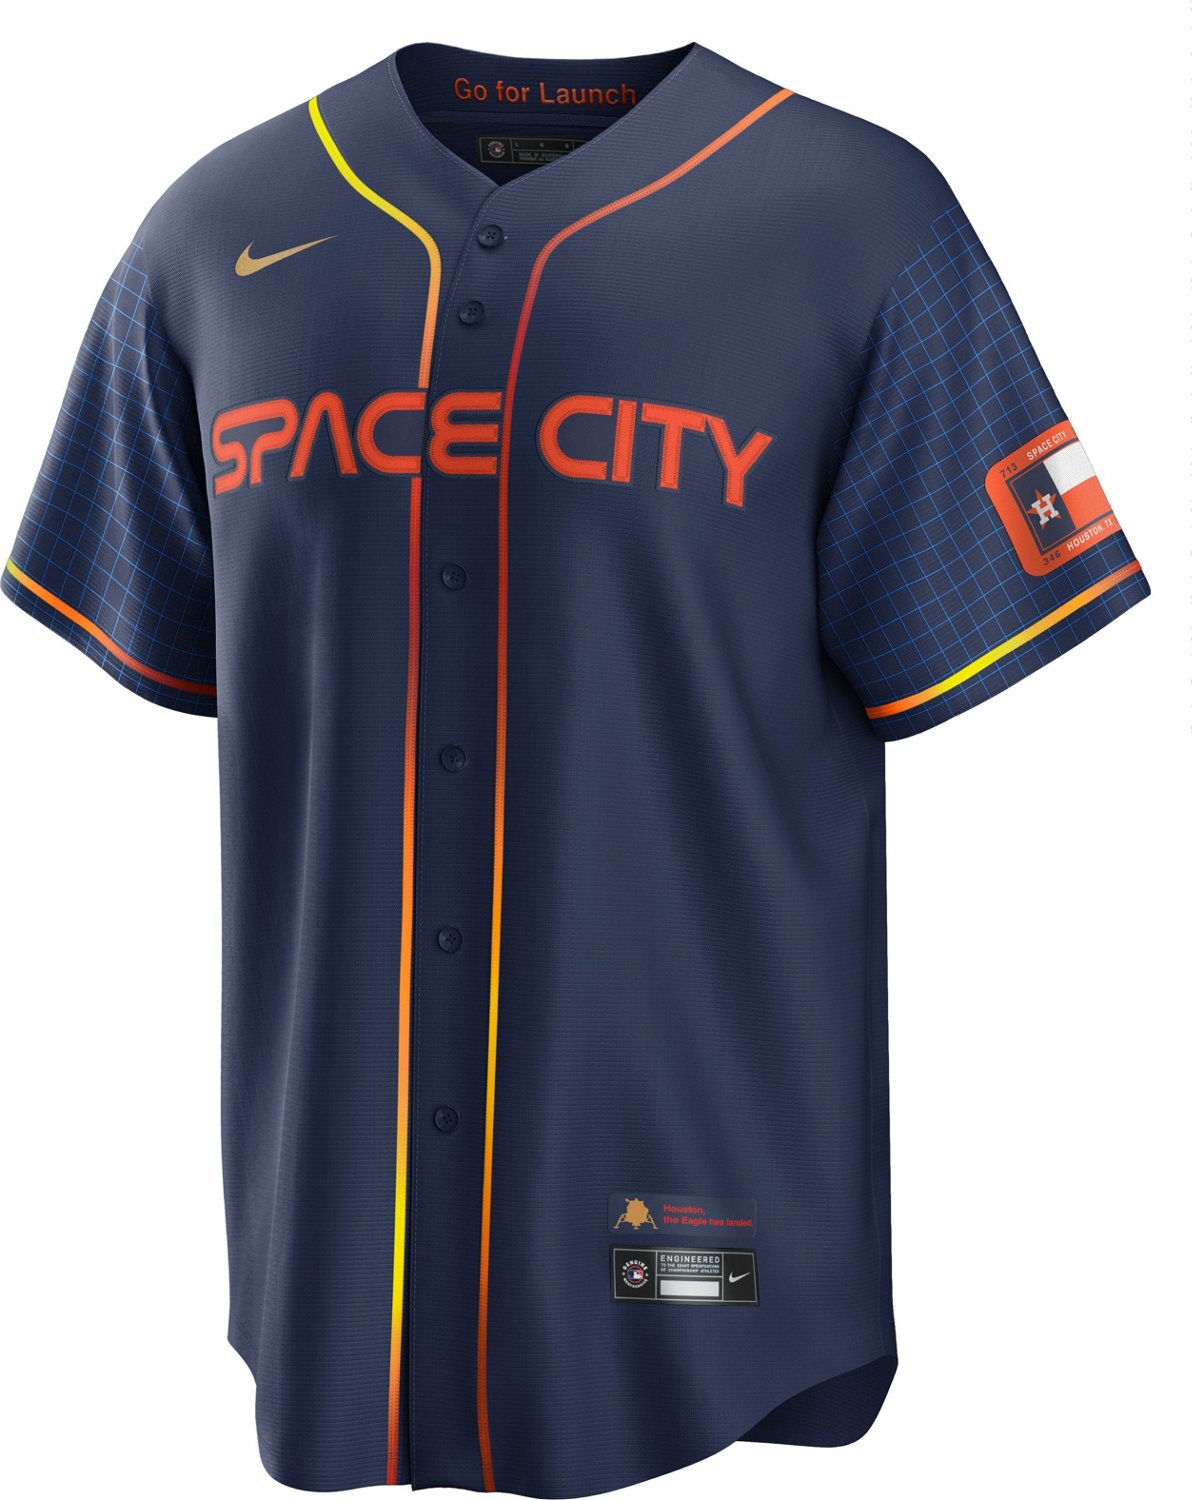 NWT Nike MLB Houston Astros Yuli Gurriel Space City Go For Launch Jersey  Mens L